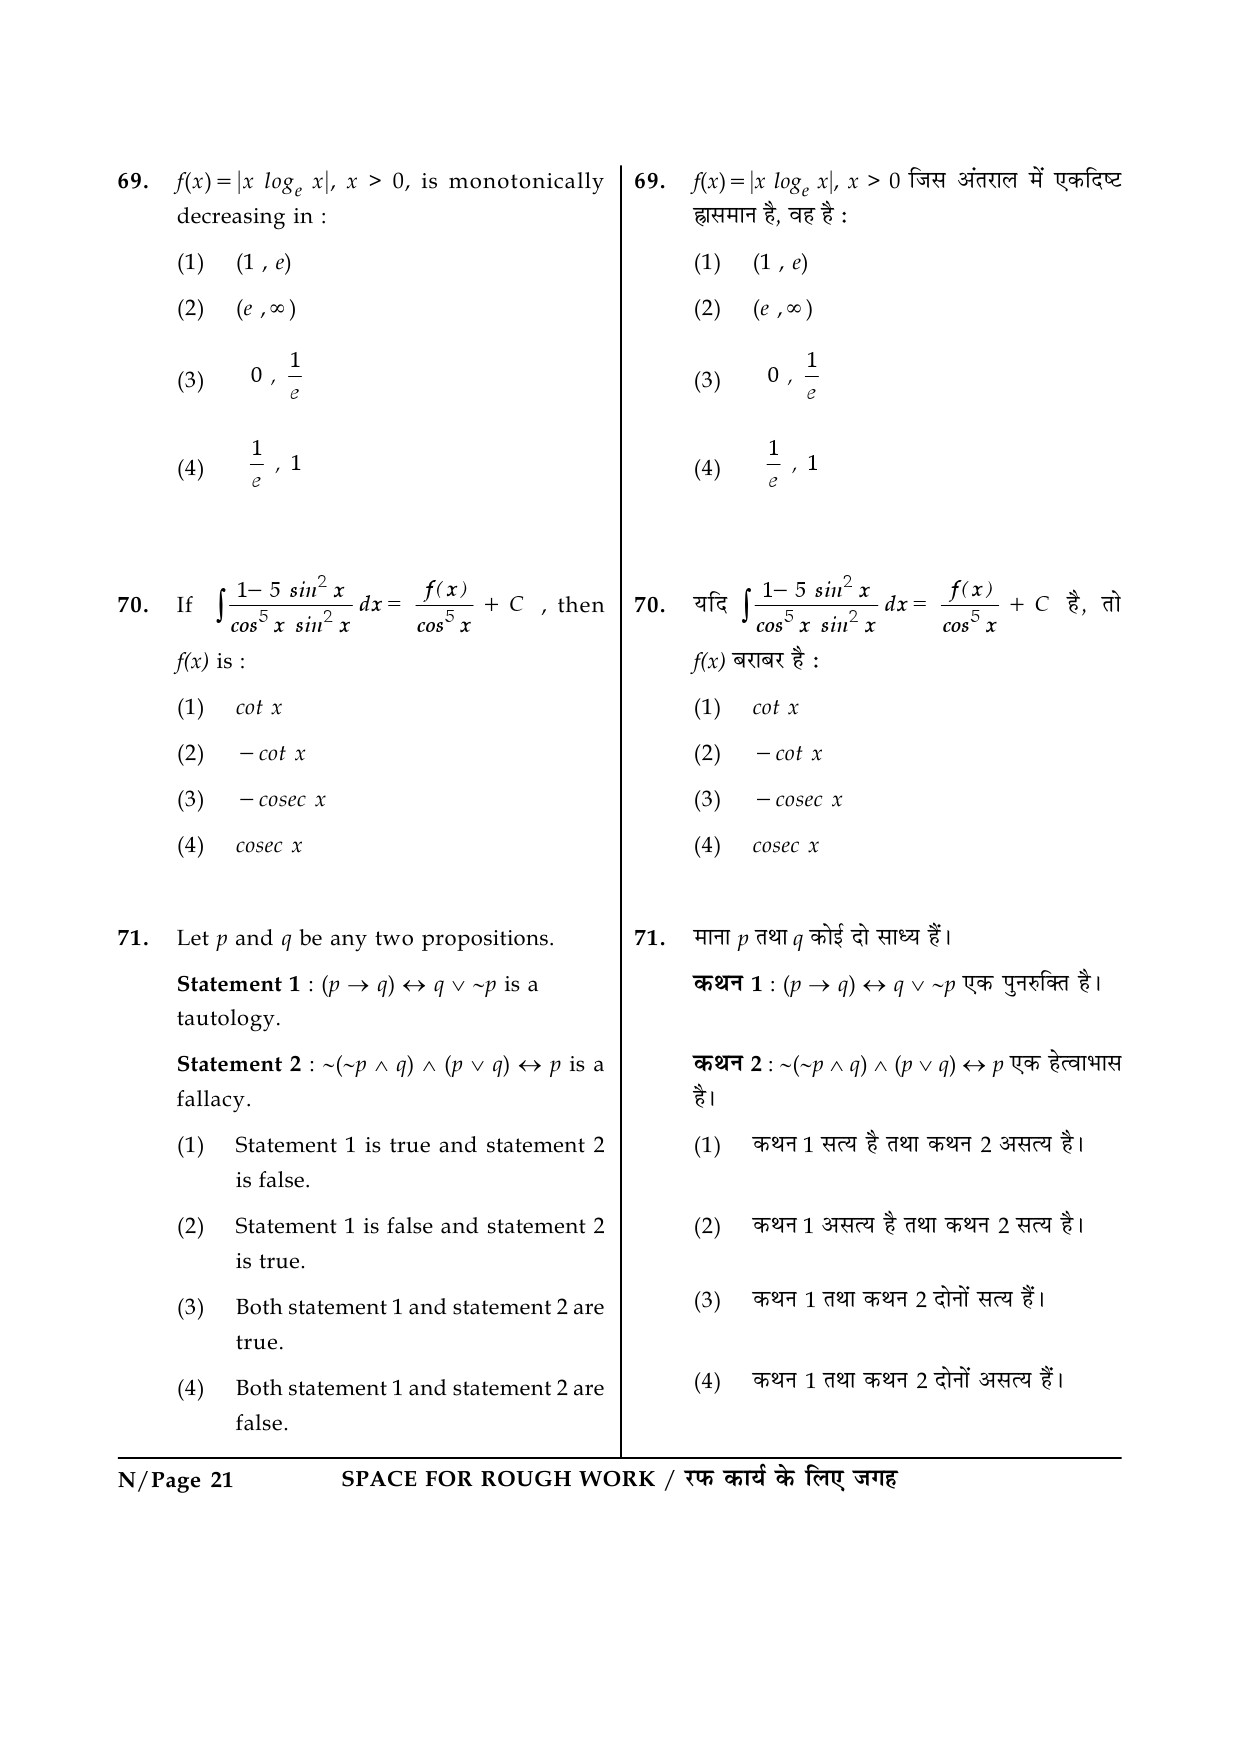 JEE Main Exam Question Paper 2015 Booklet N 21